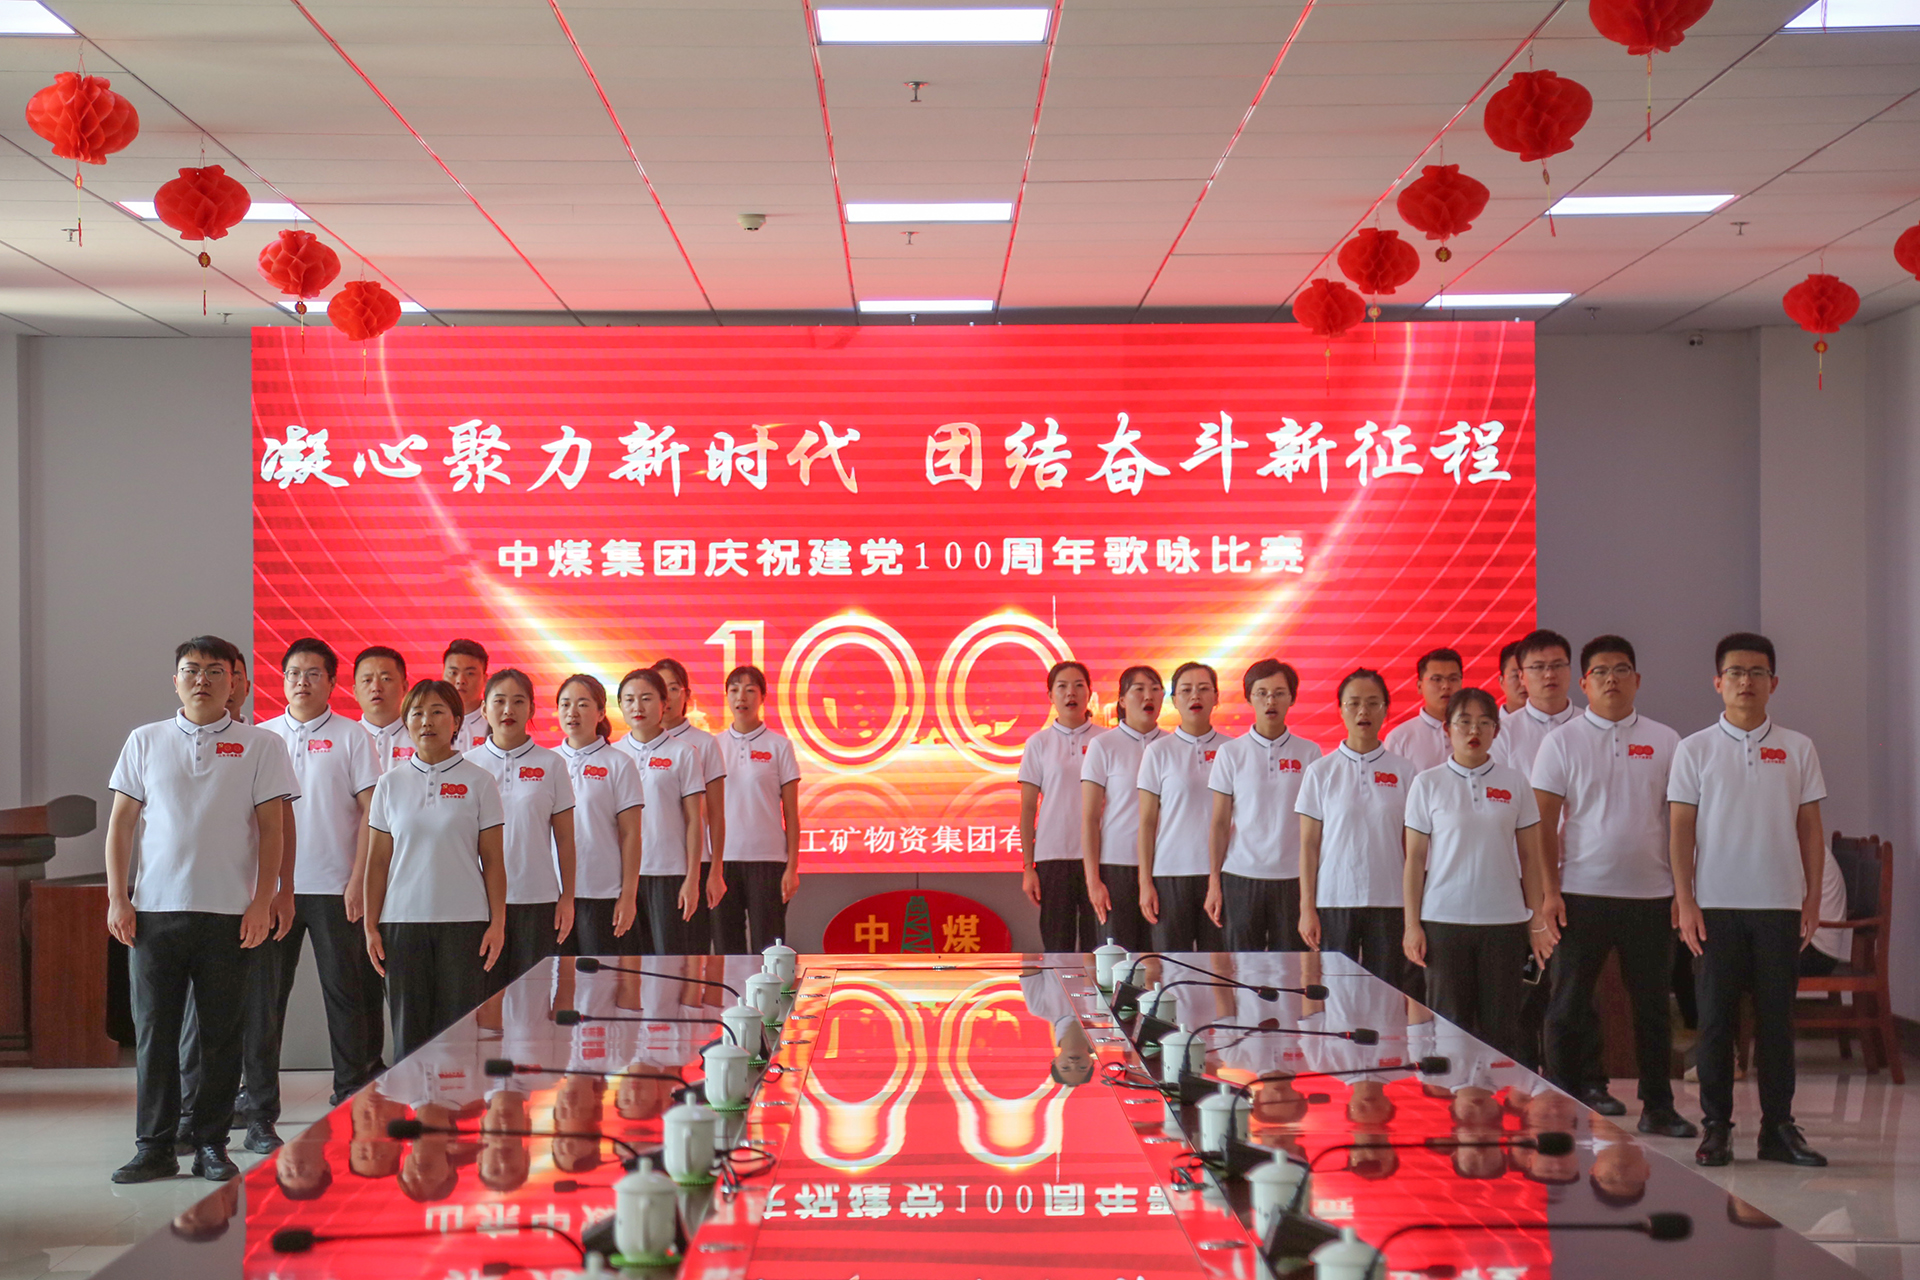 The Party Committee Of China Coal Group Launched A Series Of Activities To Celebrate The 100th Anniversary Of The Founding Of The Communist Party Of China